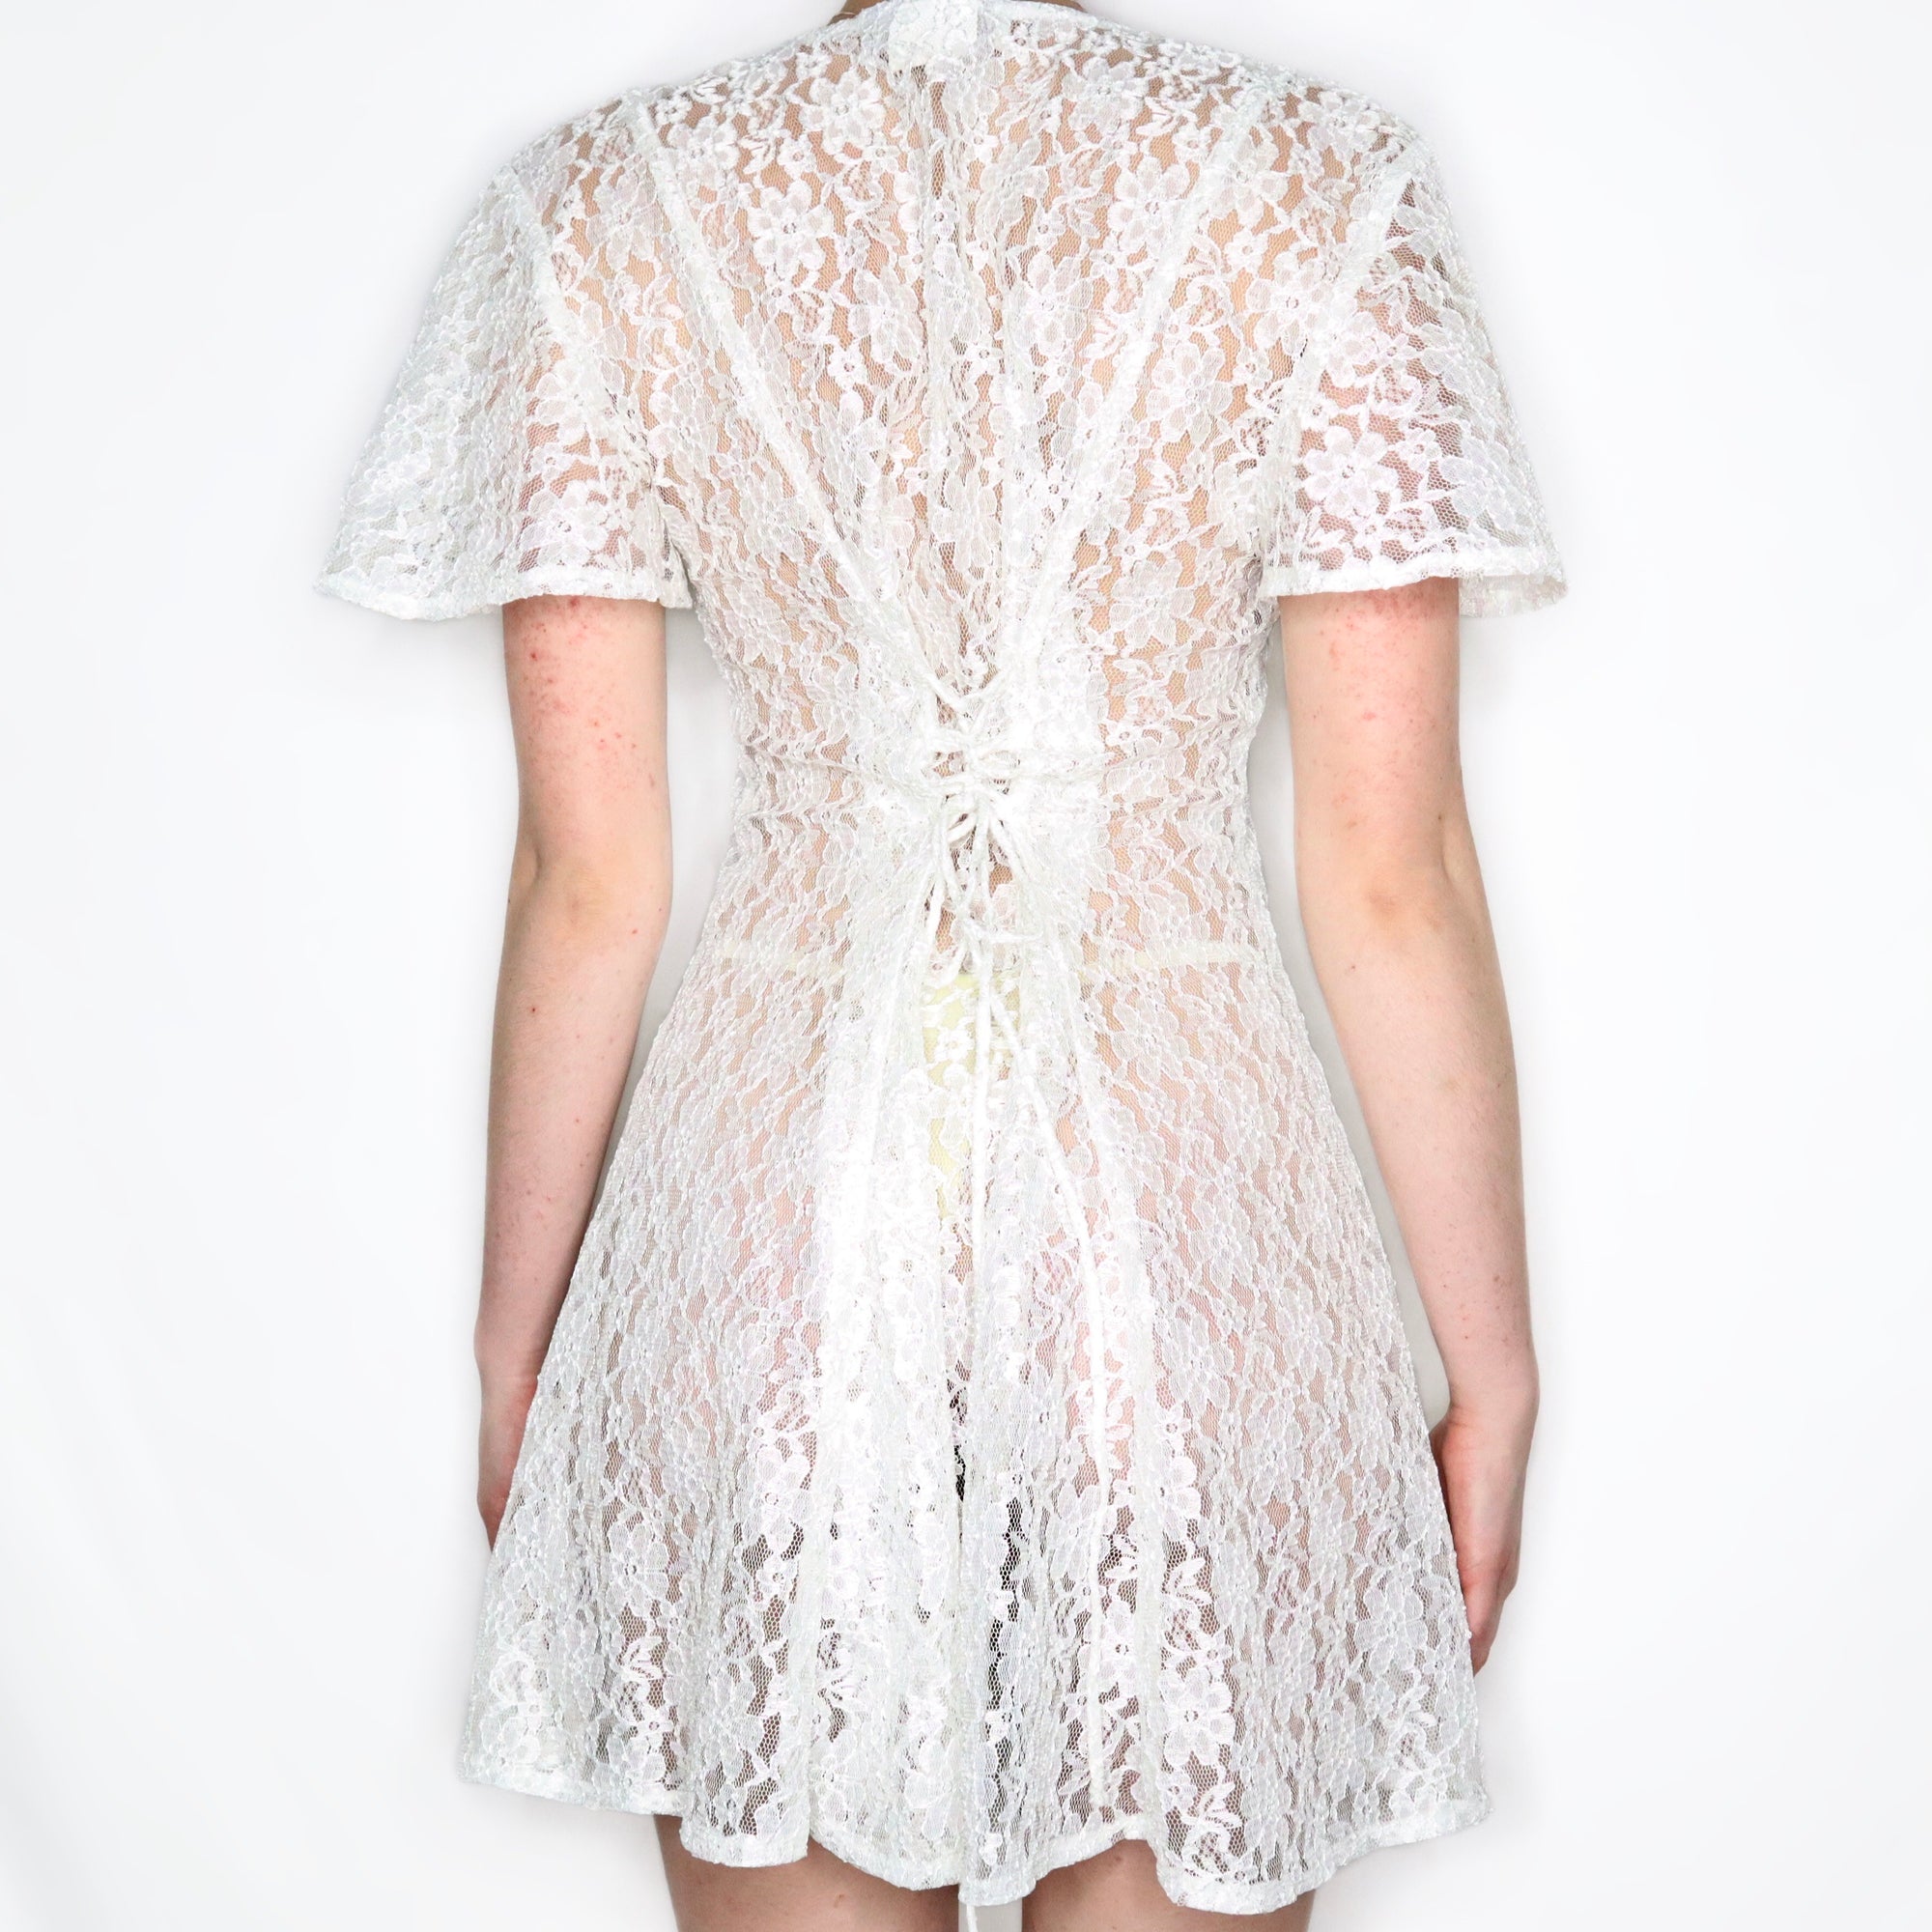 Vintage 80s Angelic Sheer White Lace Dress